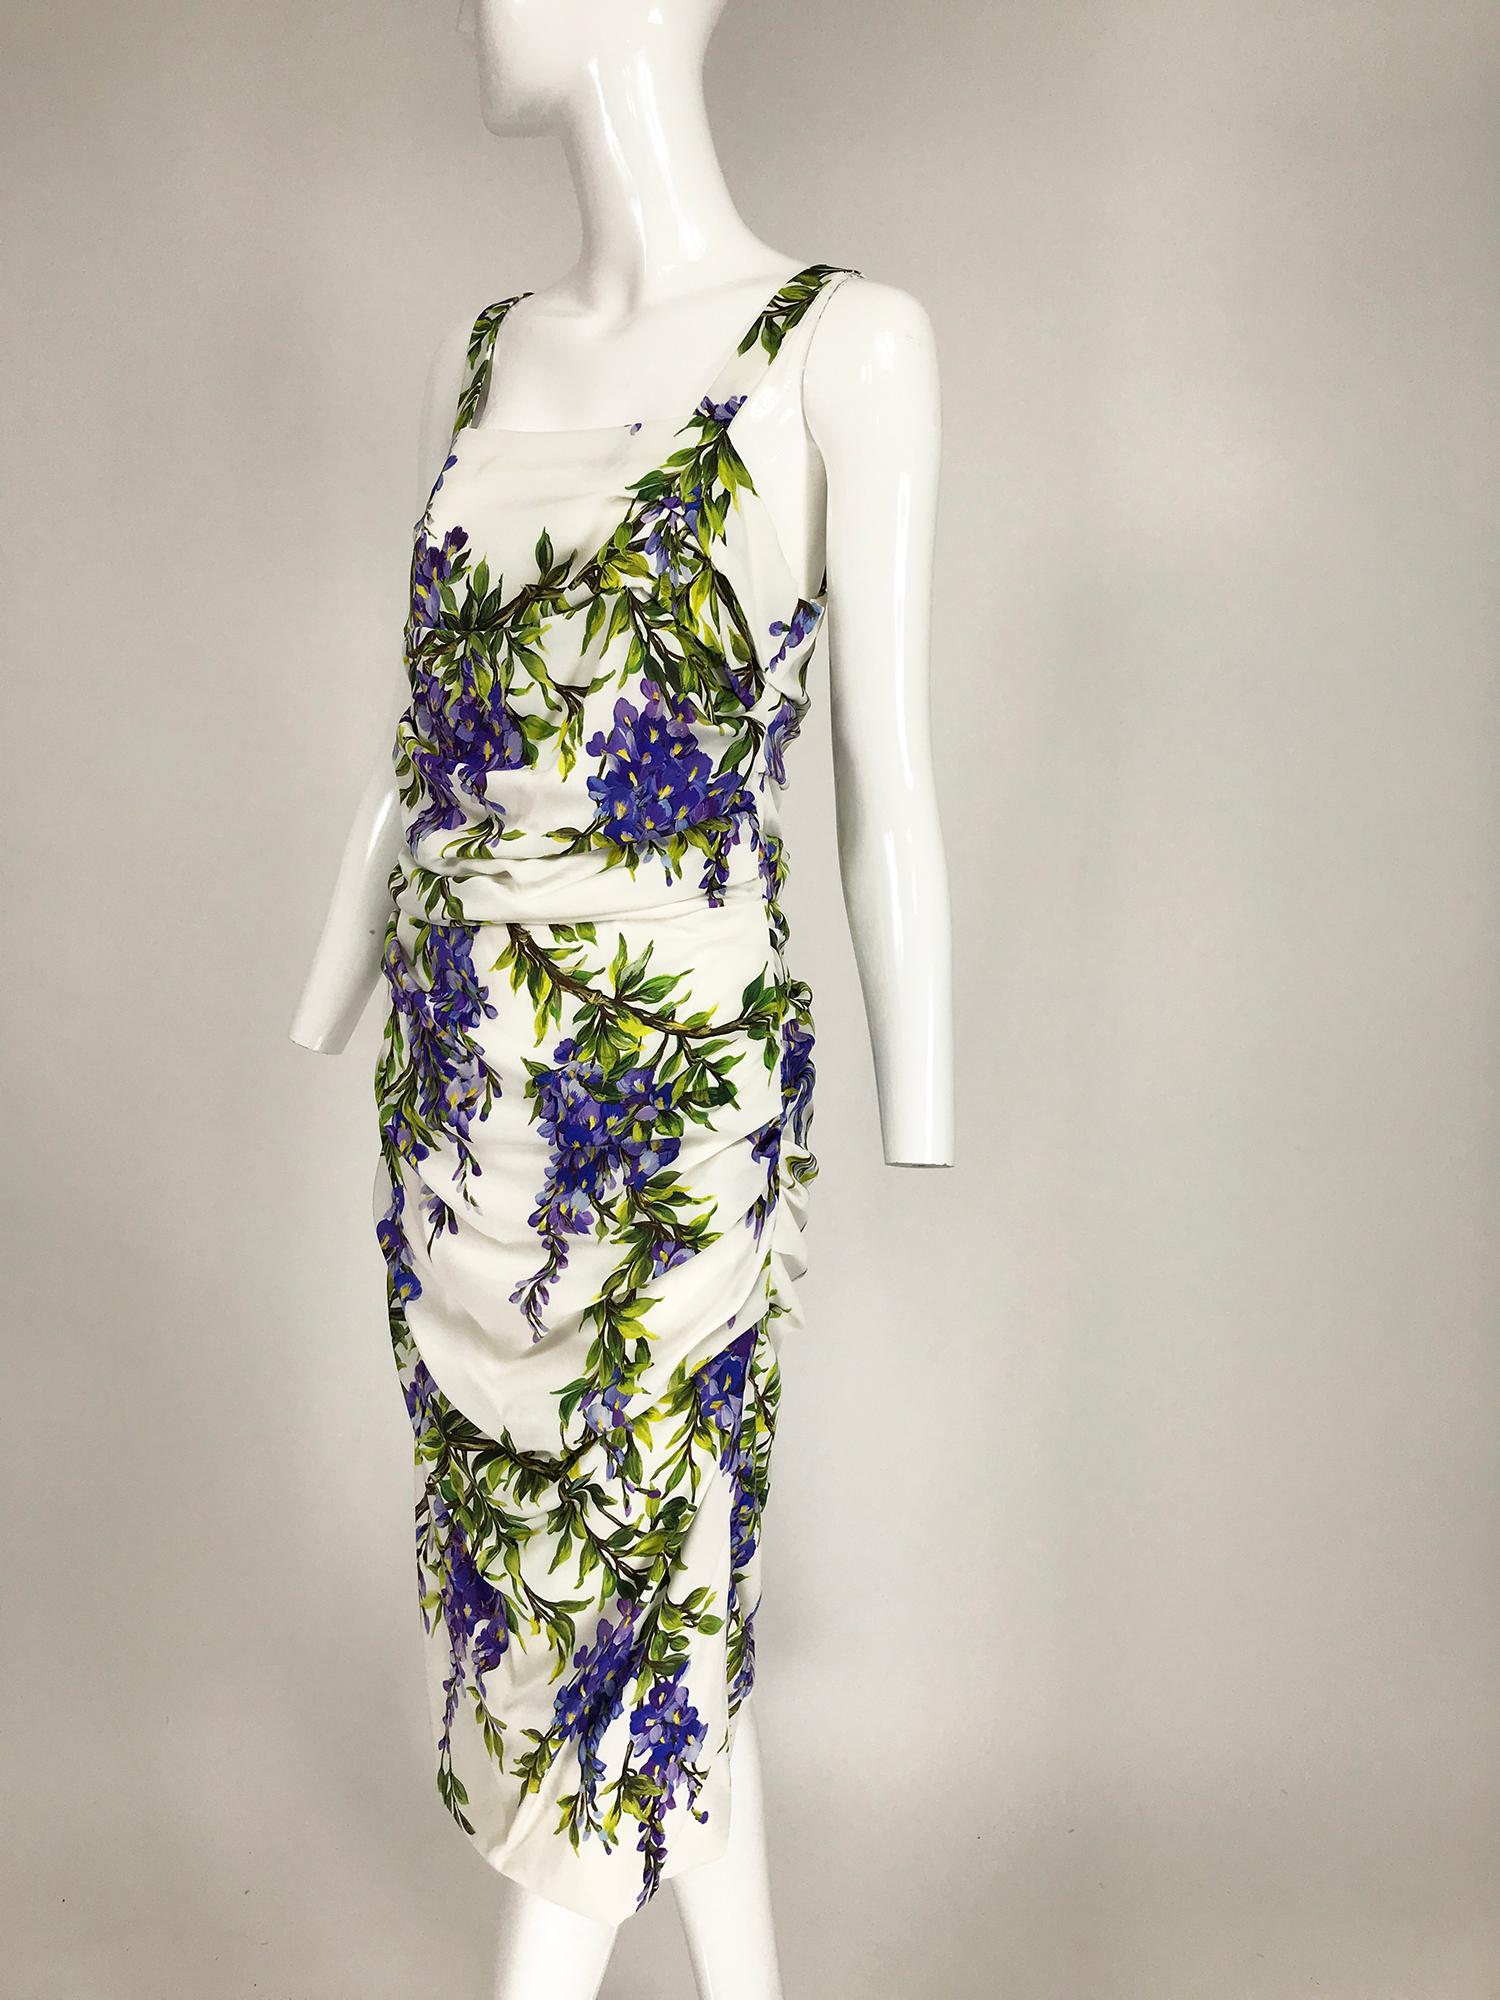 Dolce & Gabbana Wisteria Print Side Ruched Dress in White & Lavender 1